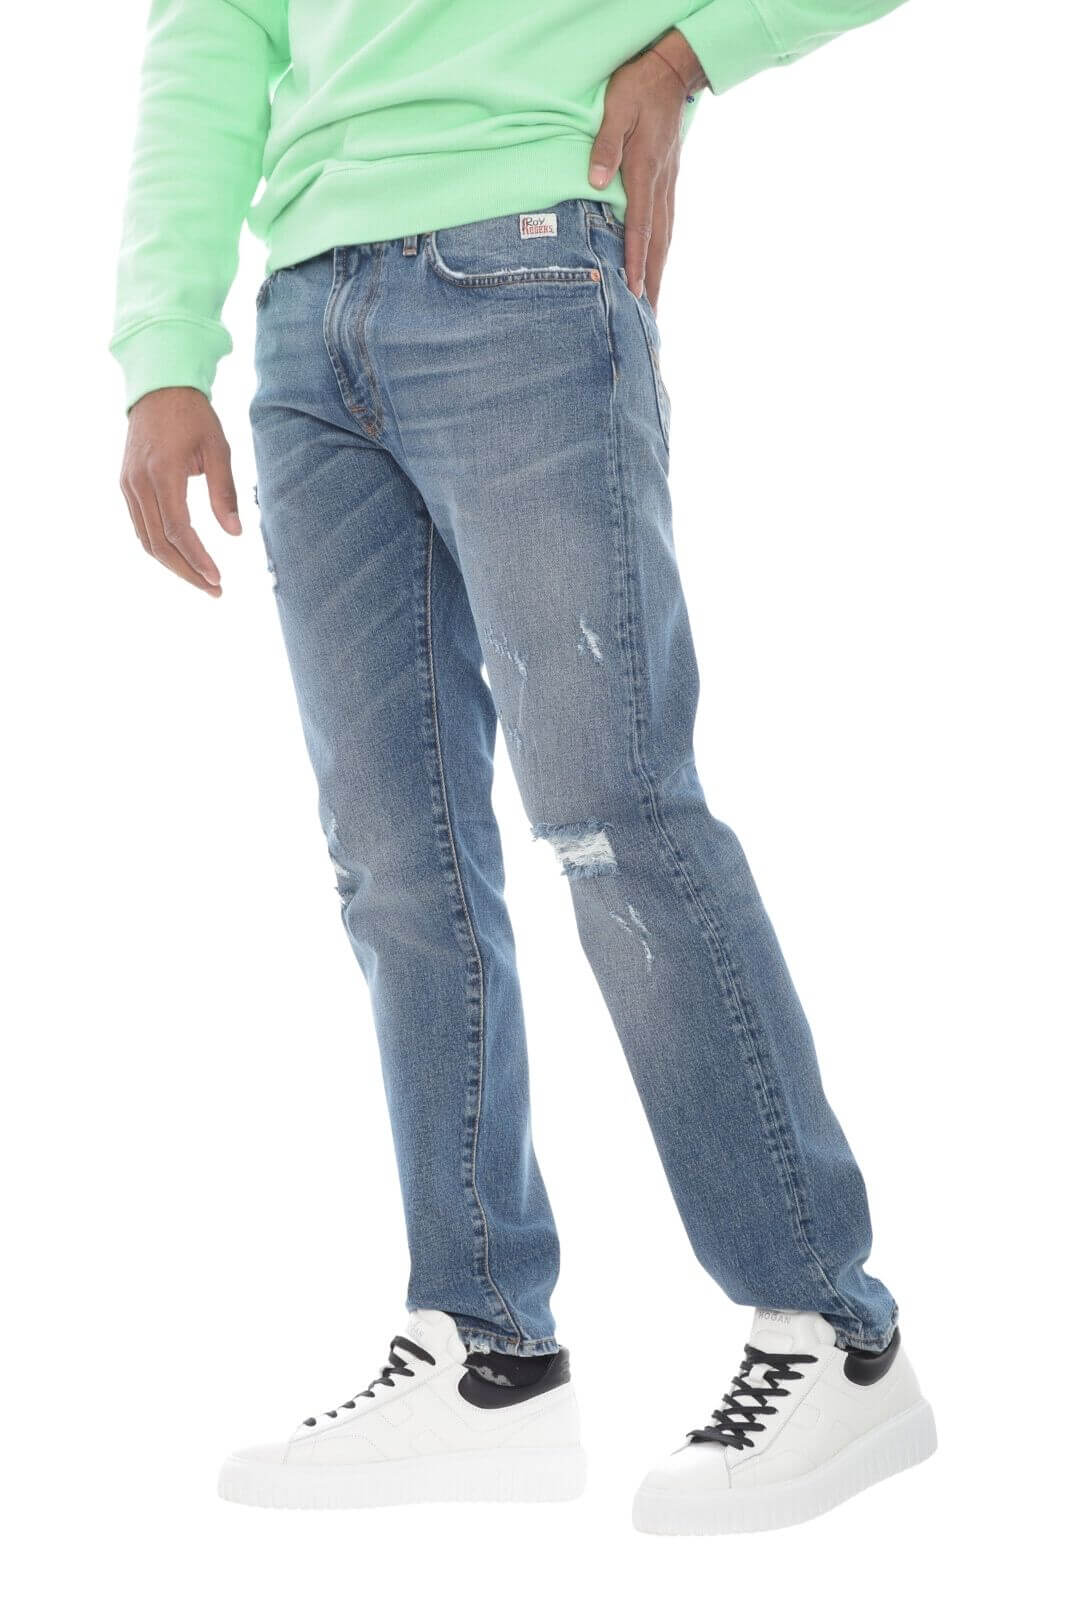 Roy Roger’s Jeans Uomo Cult MAN